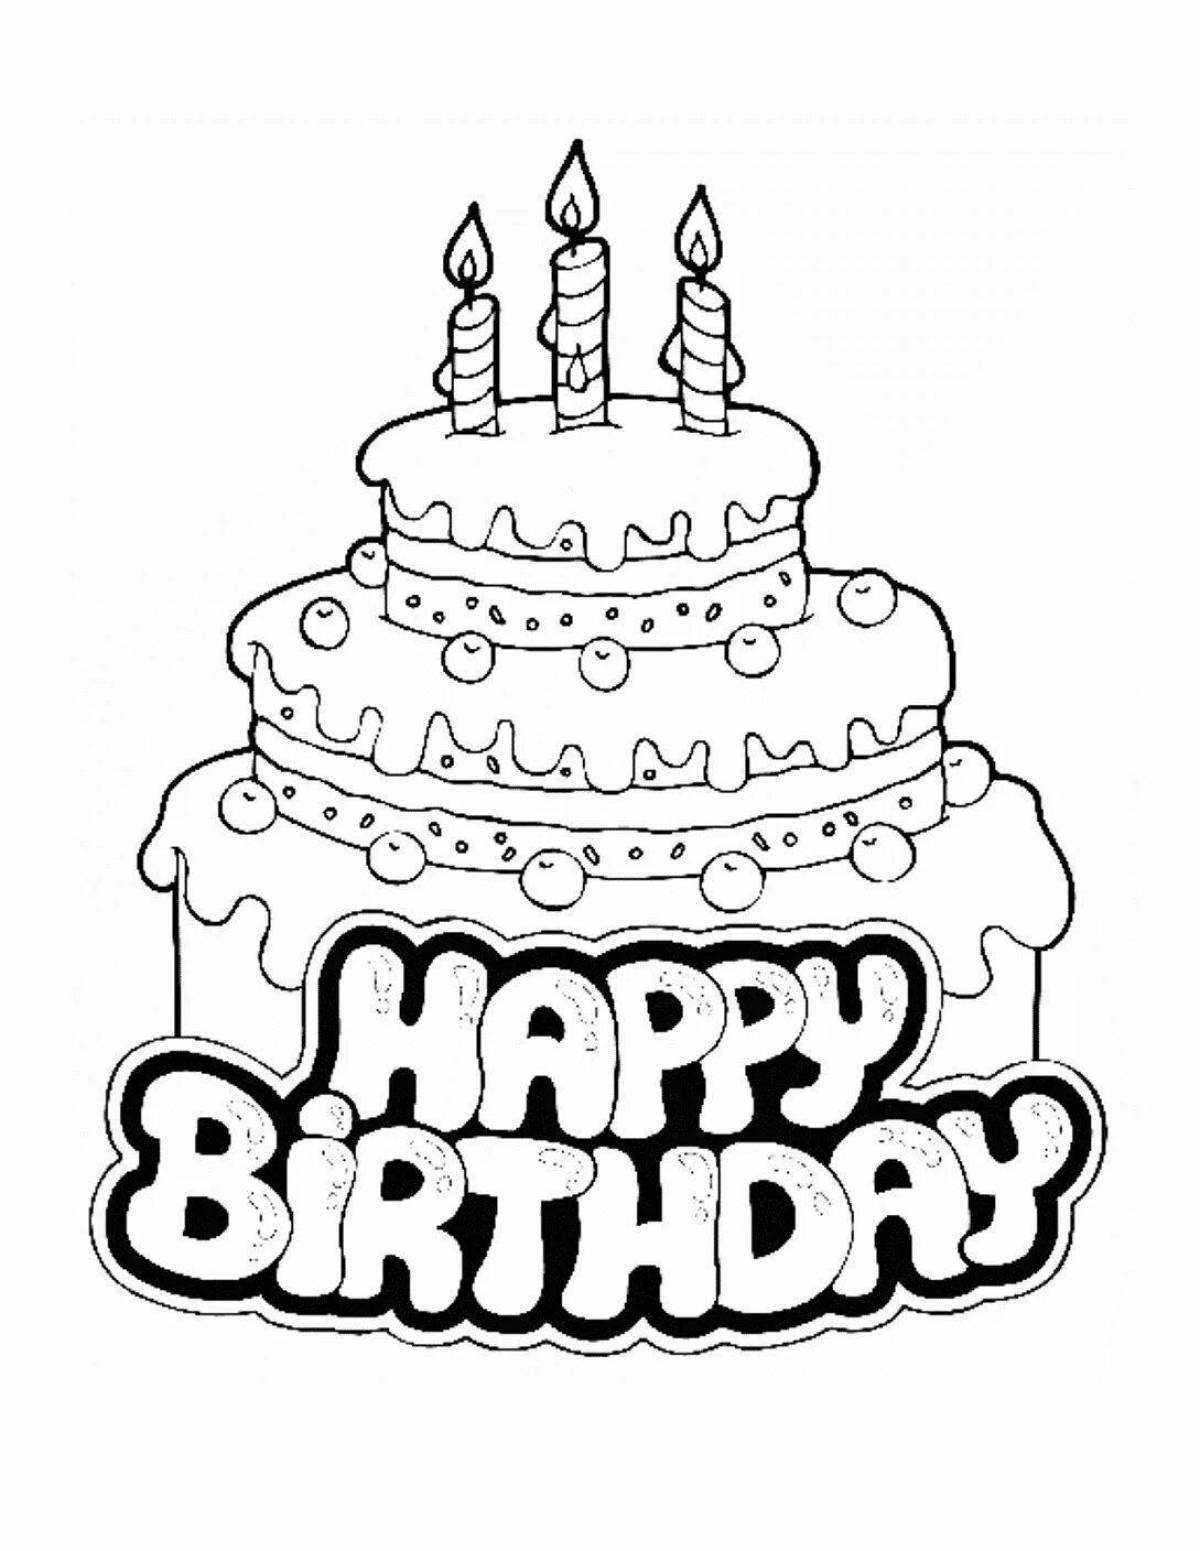 Happy birthday coloring pages!